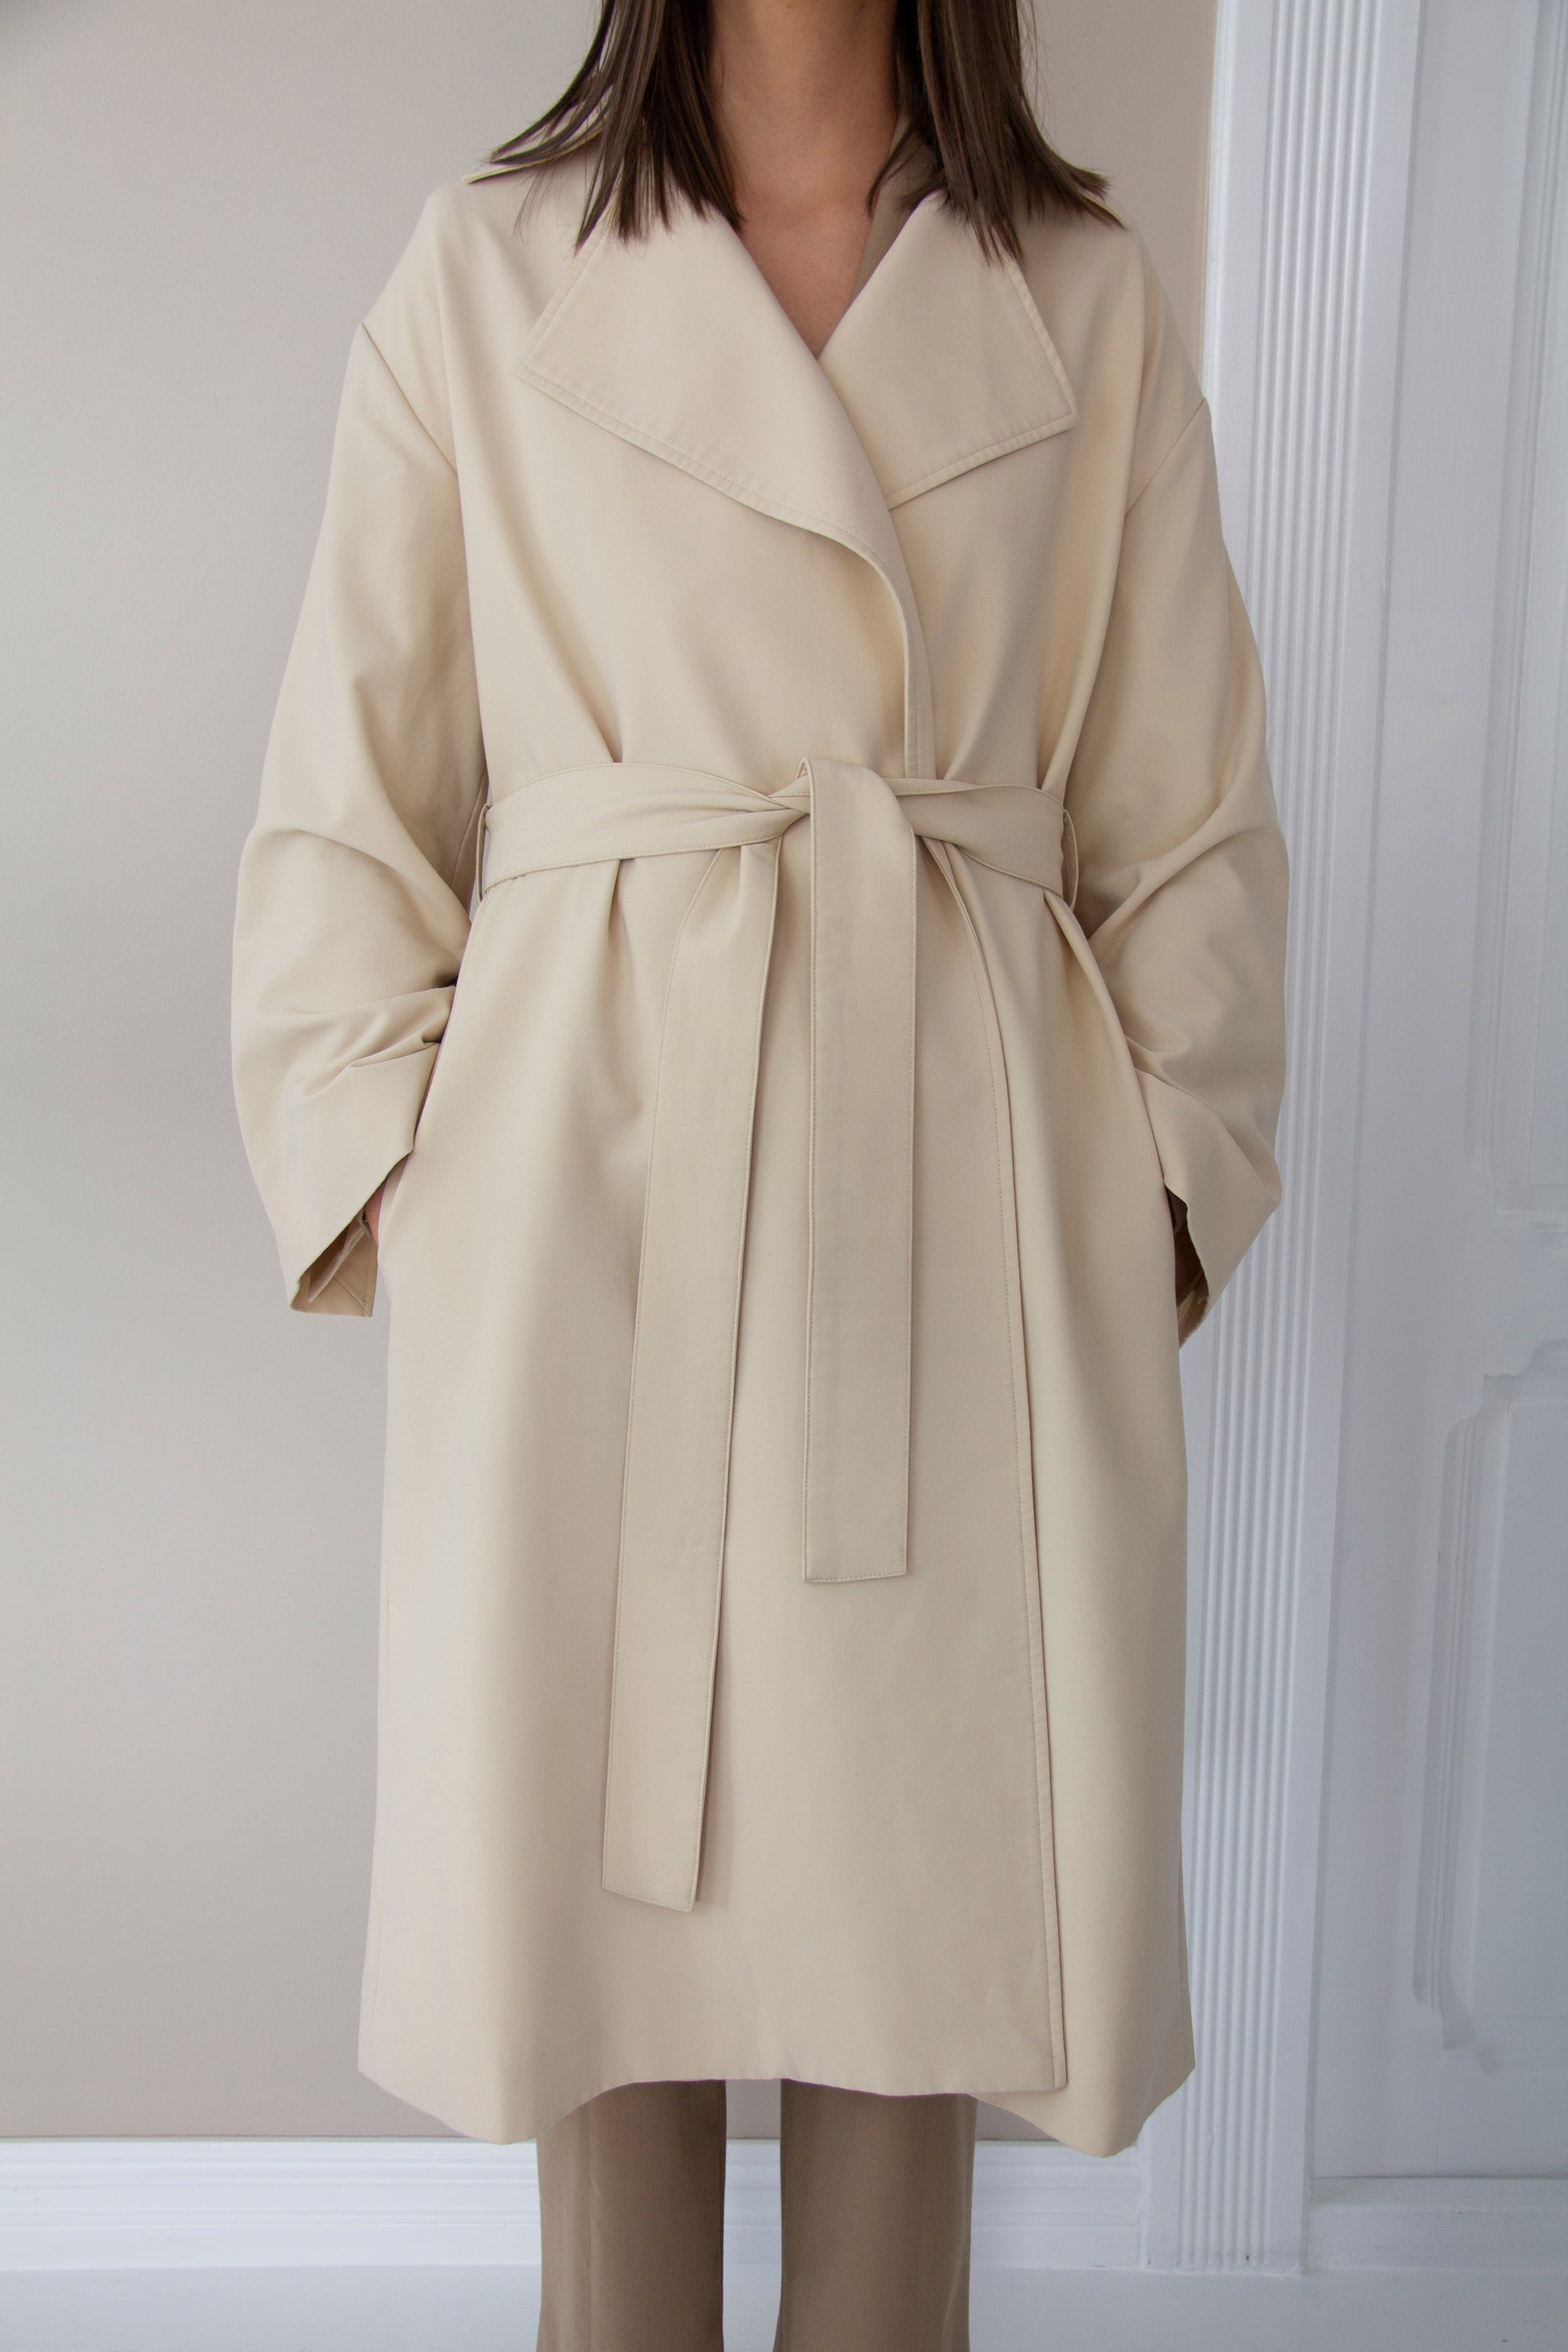 FRIEND OF AUDREY - Soft Trench Coat